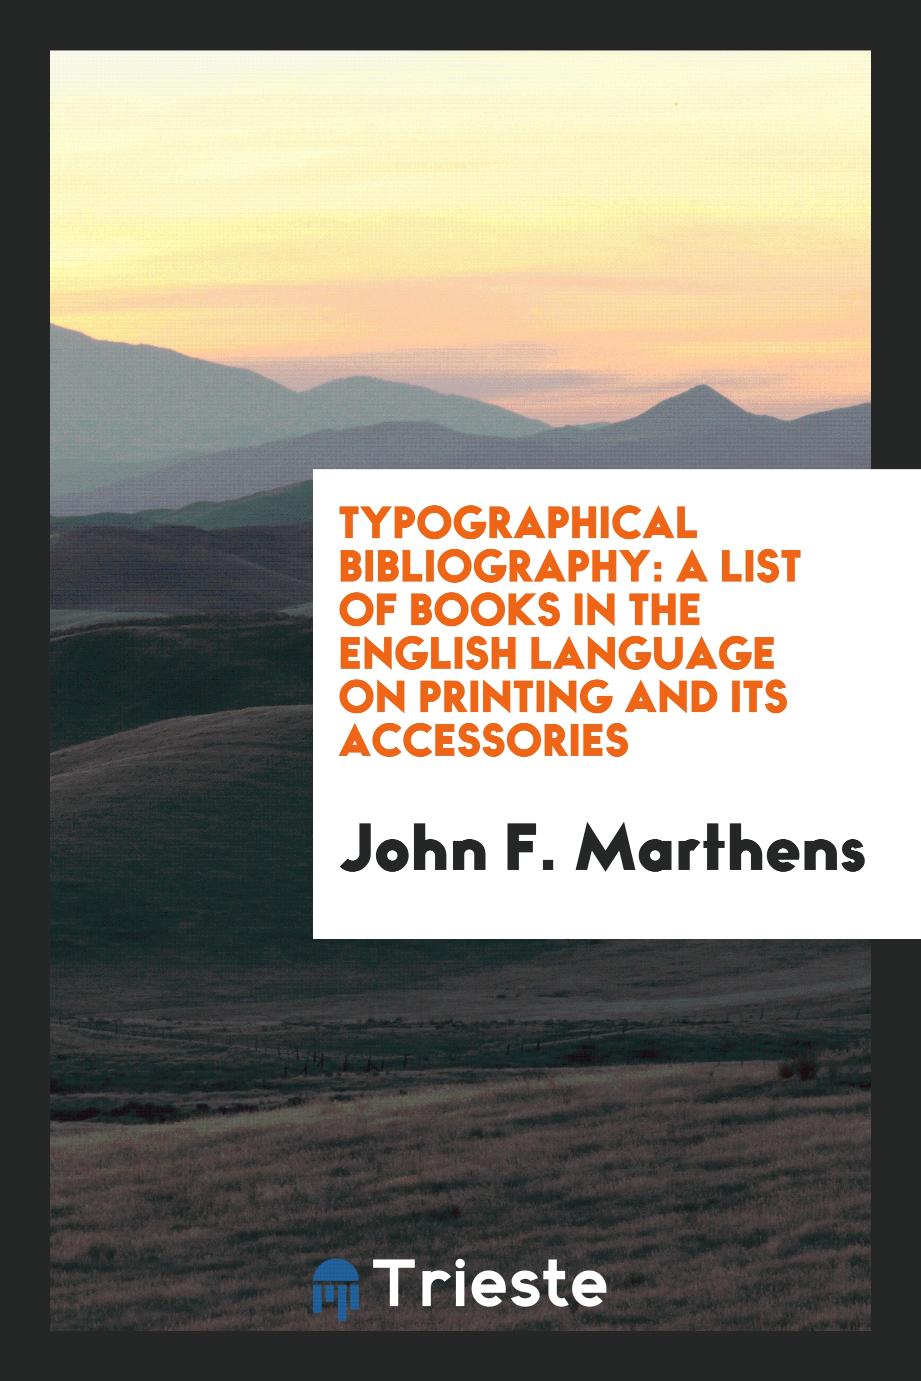 Typographical bibliography: a list of books in the English language on printing and its accessories